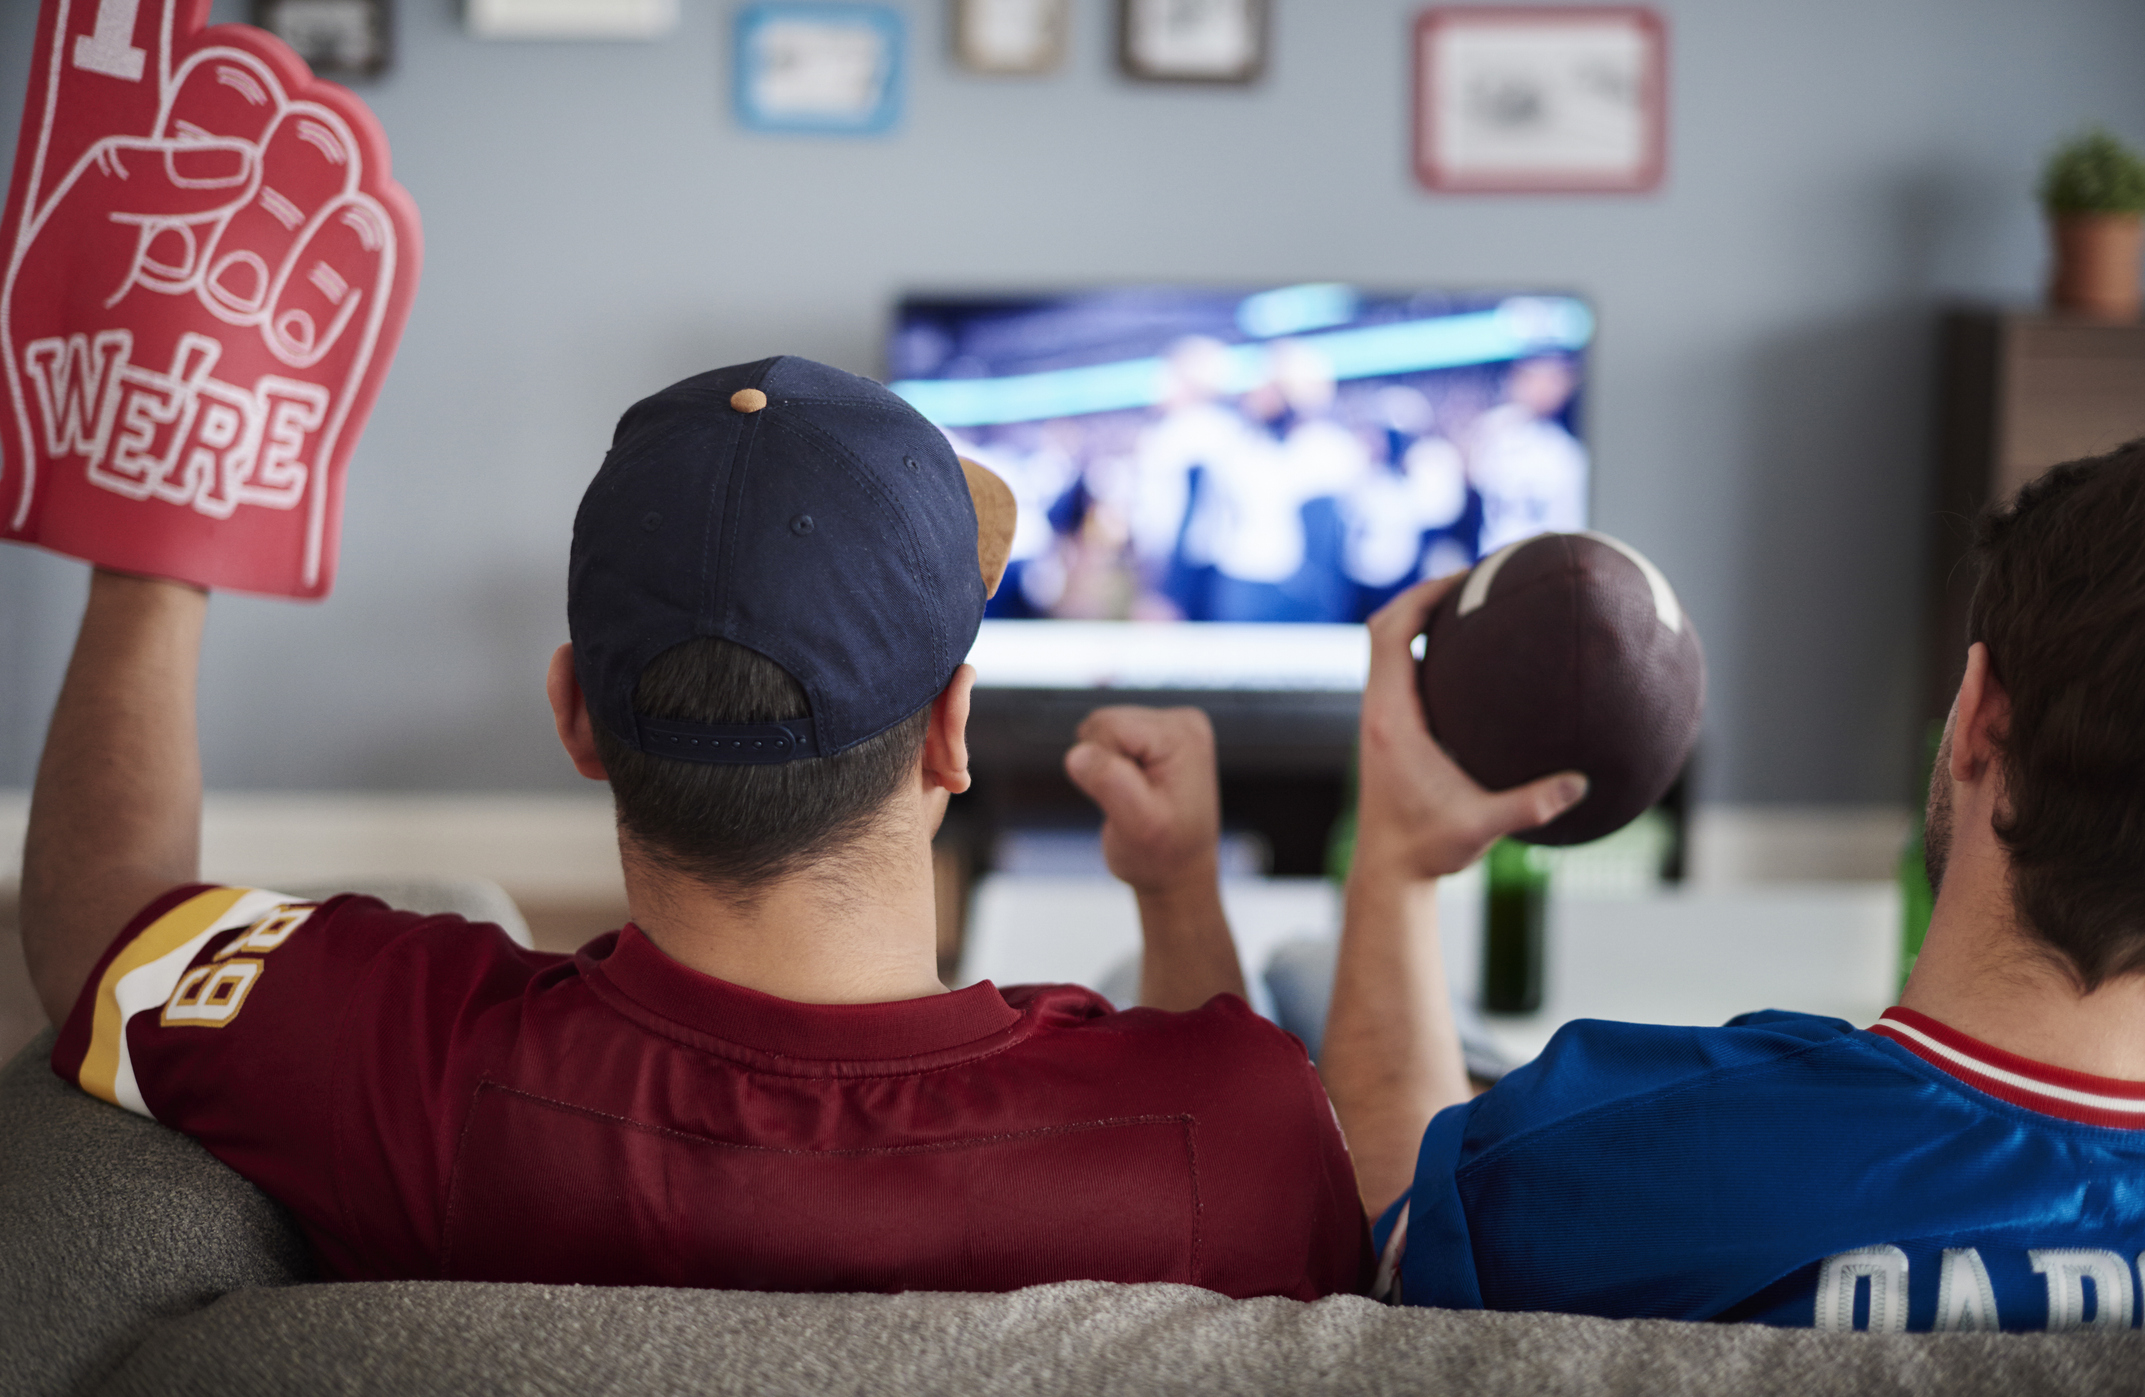 How to Watch Your Favorite Sports Without Cable